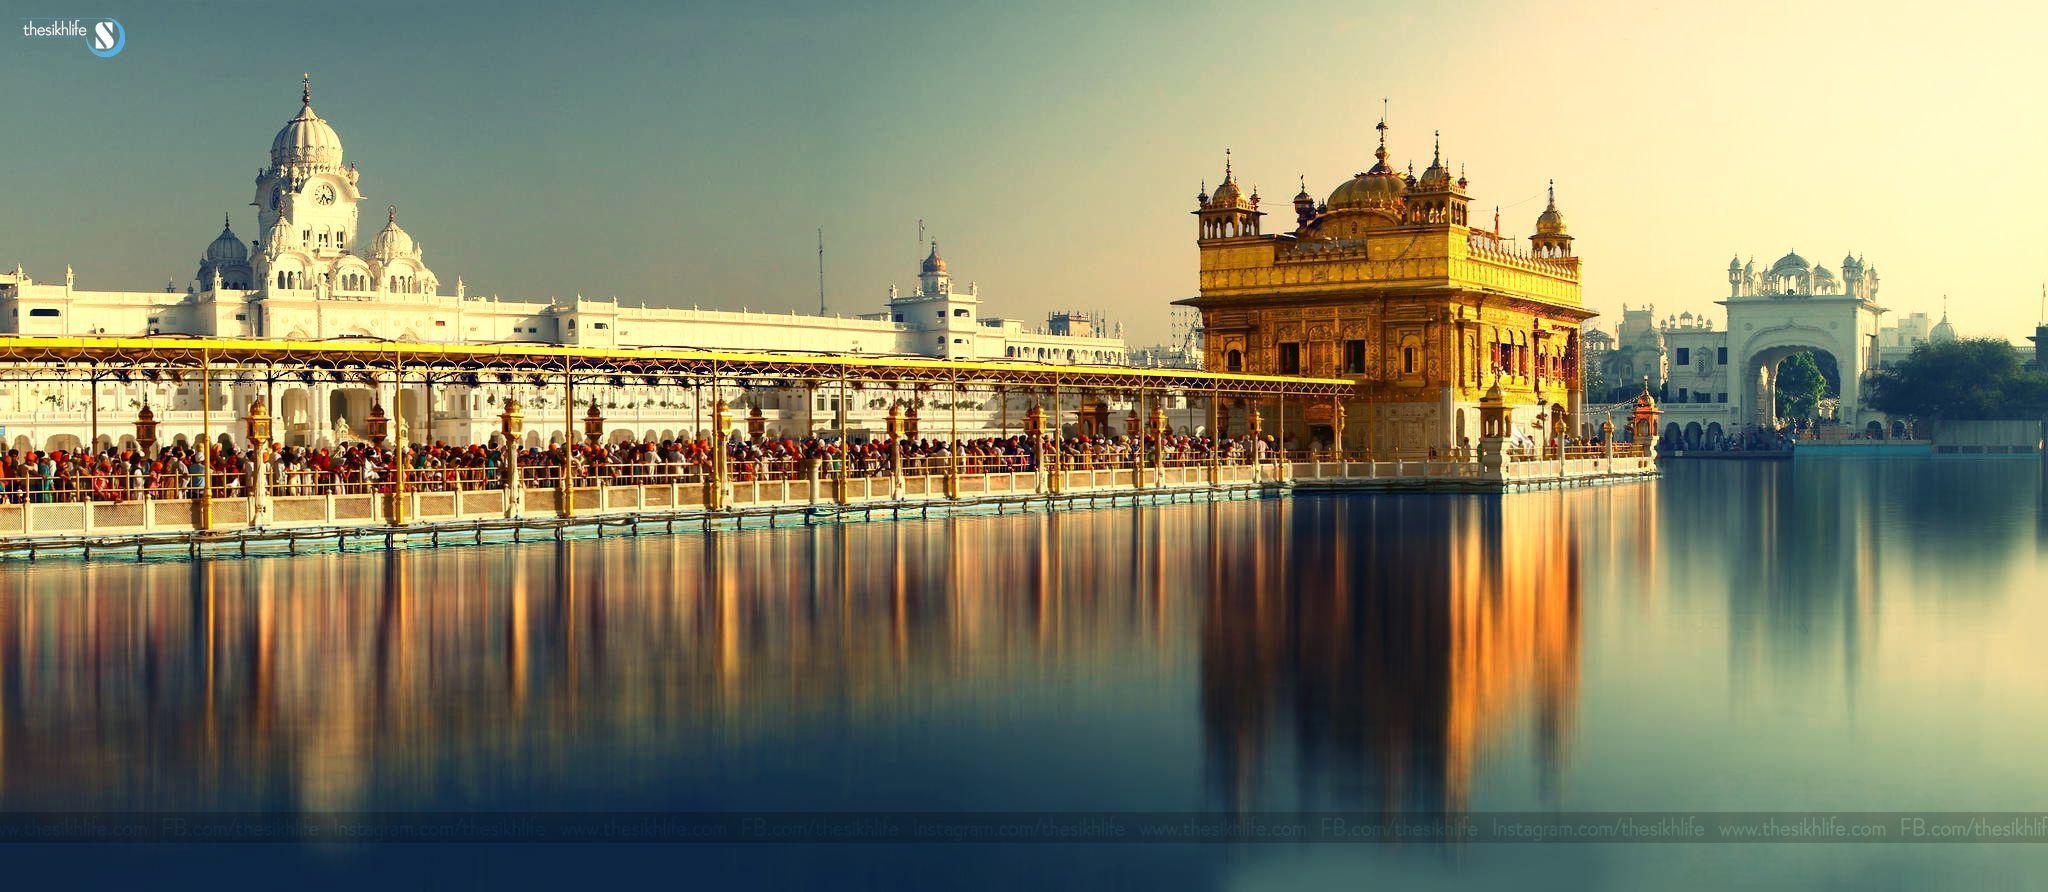 350 Golden Temple Pictures  Download Free Images on Unsplash